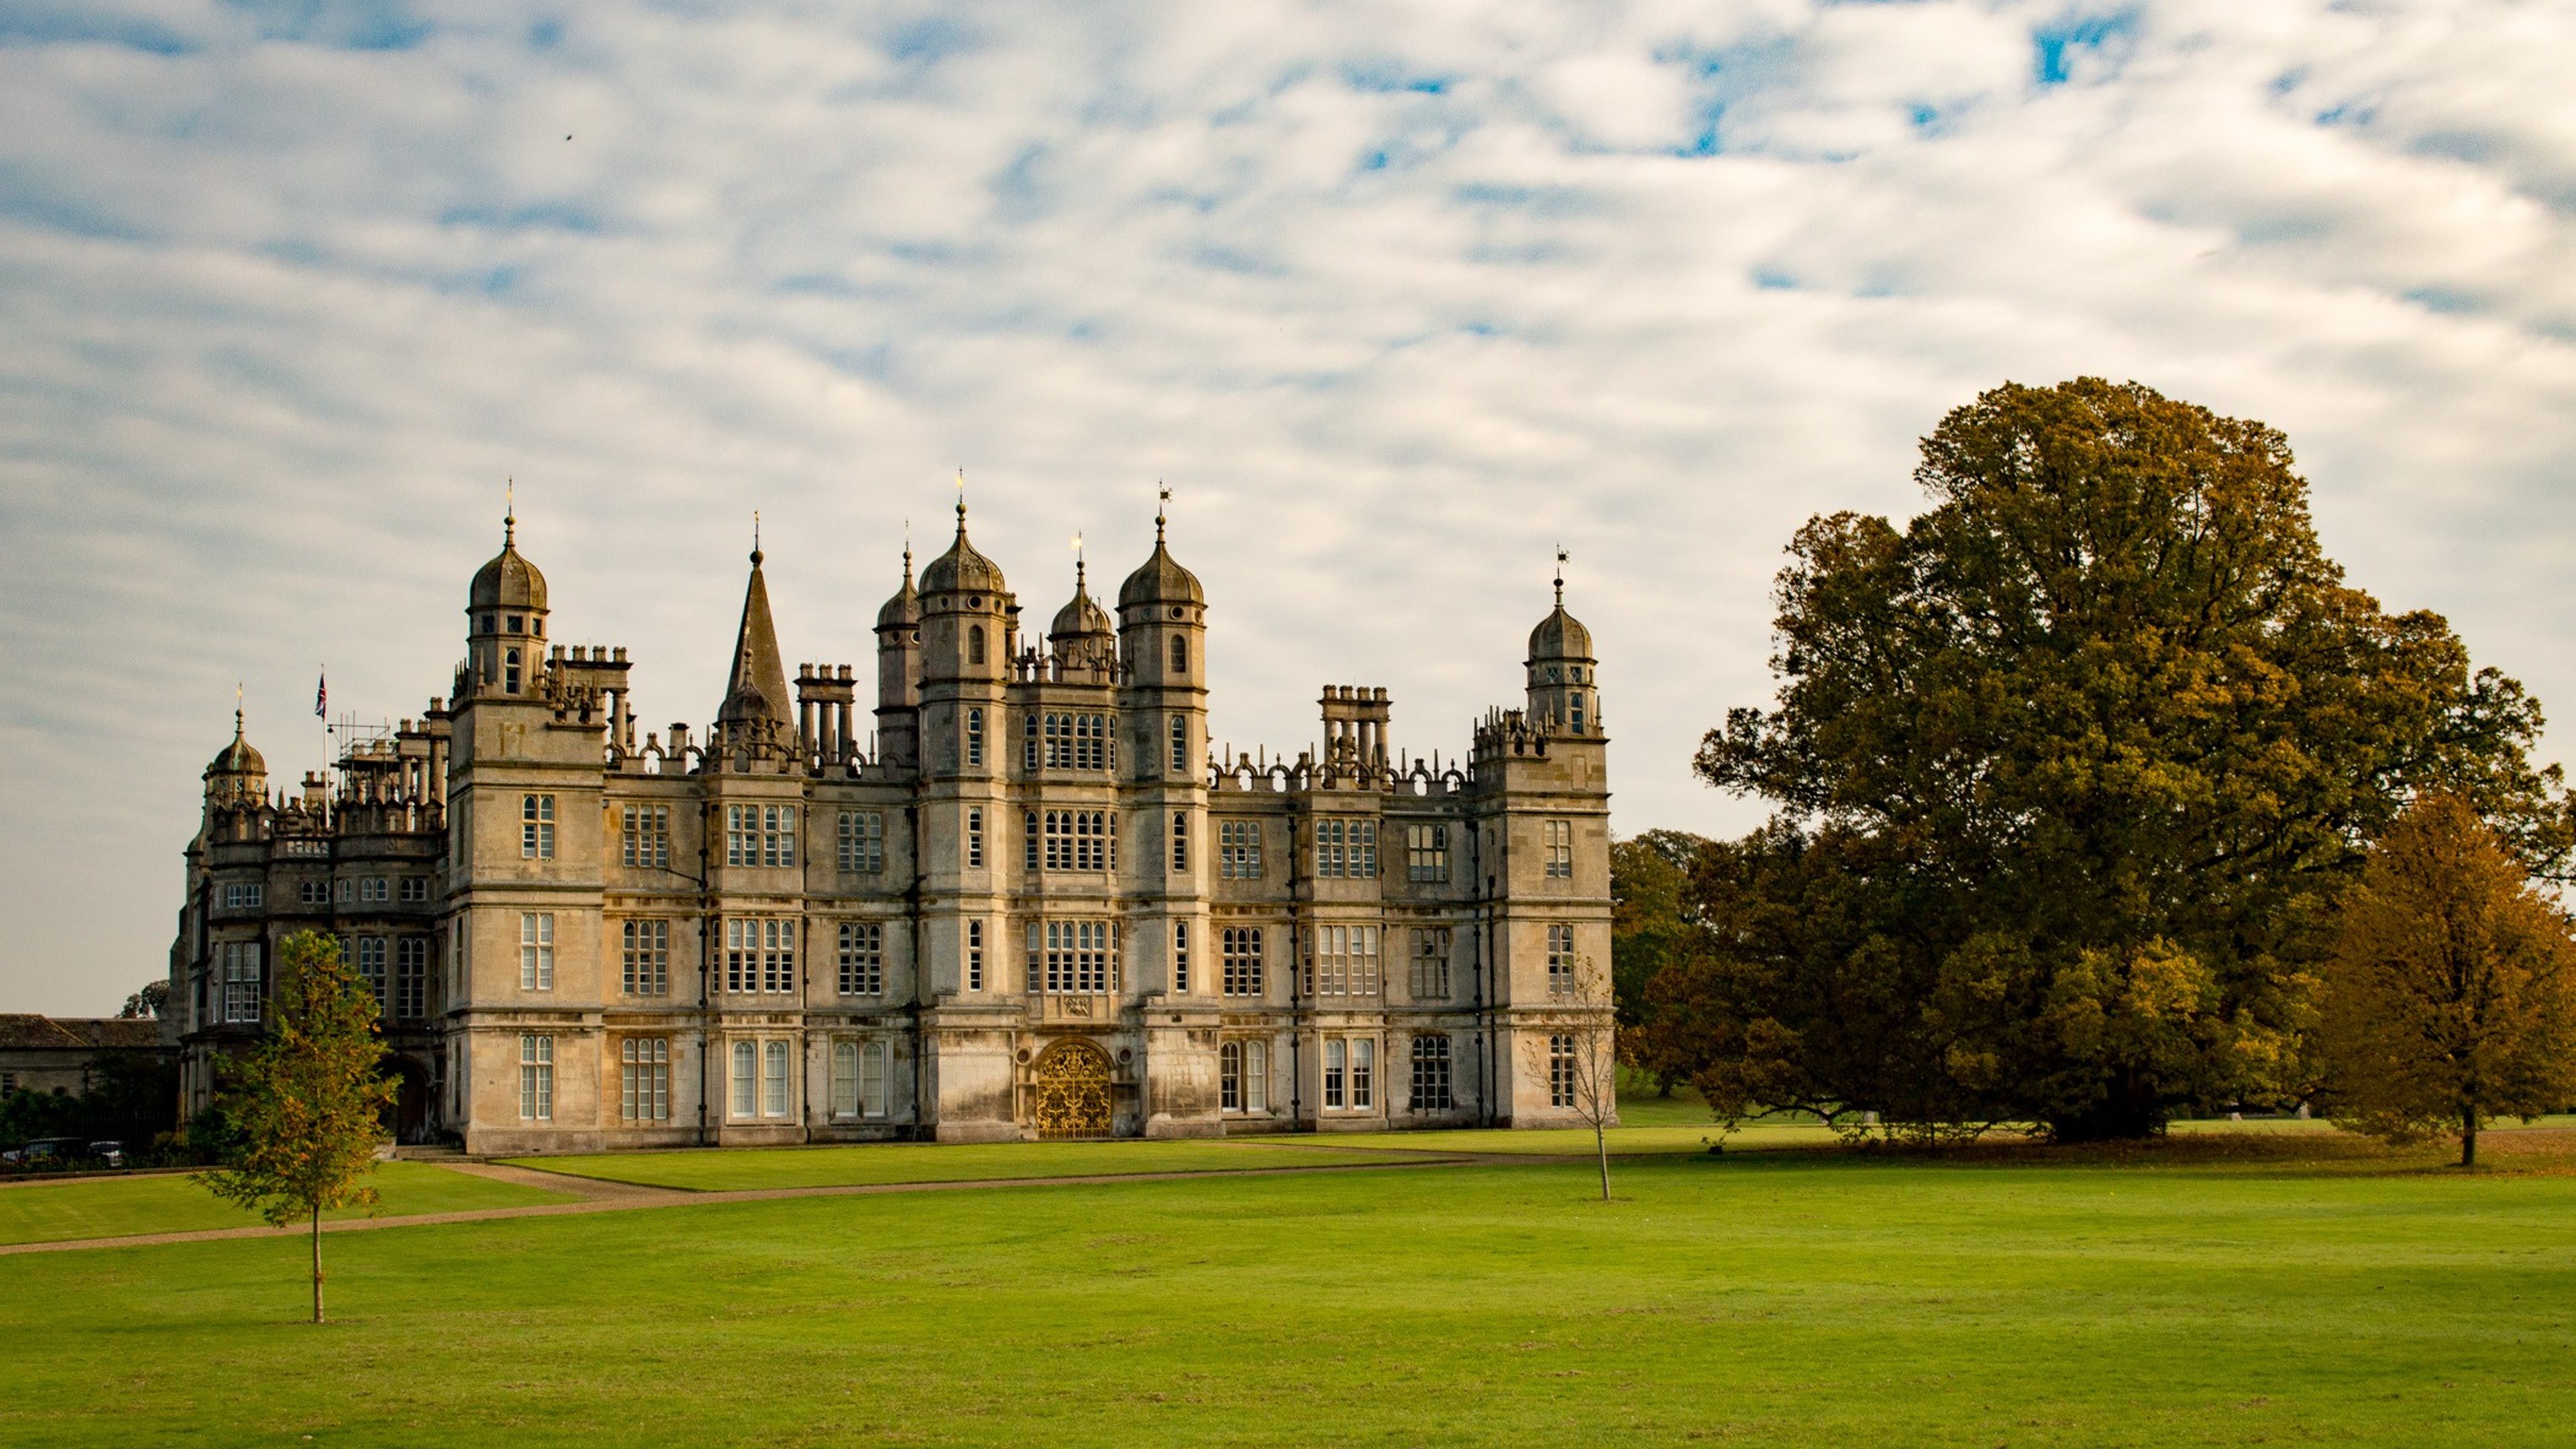 Burghley House and Garden